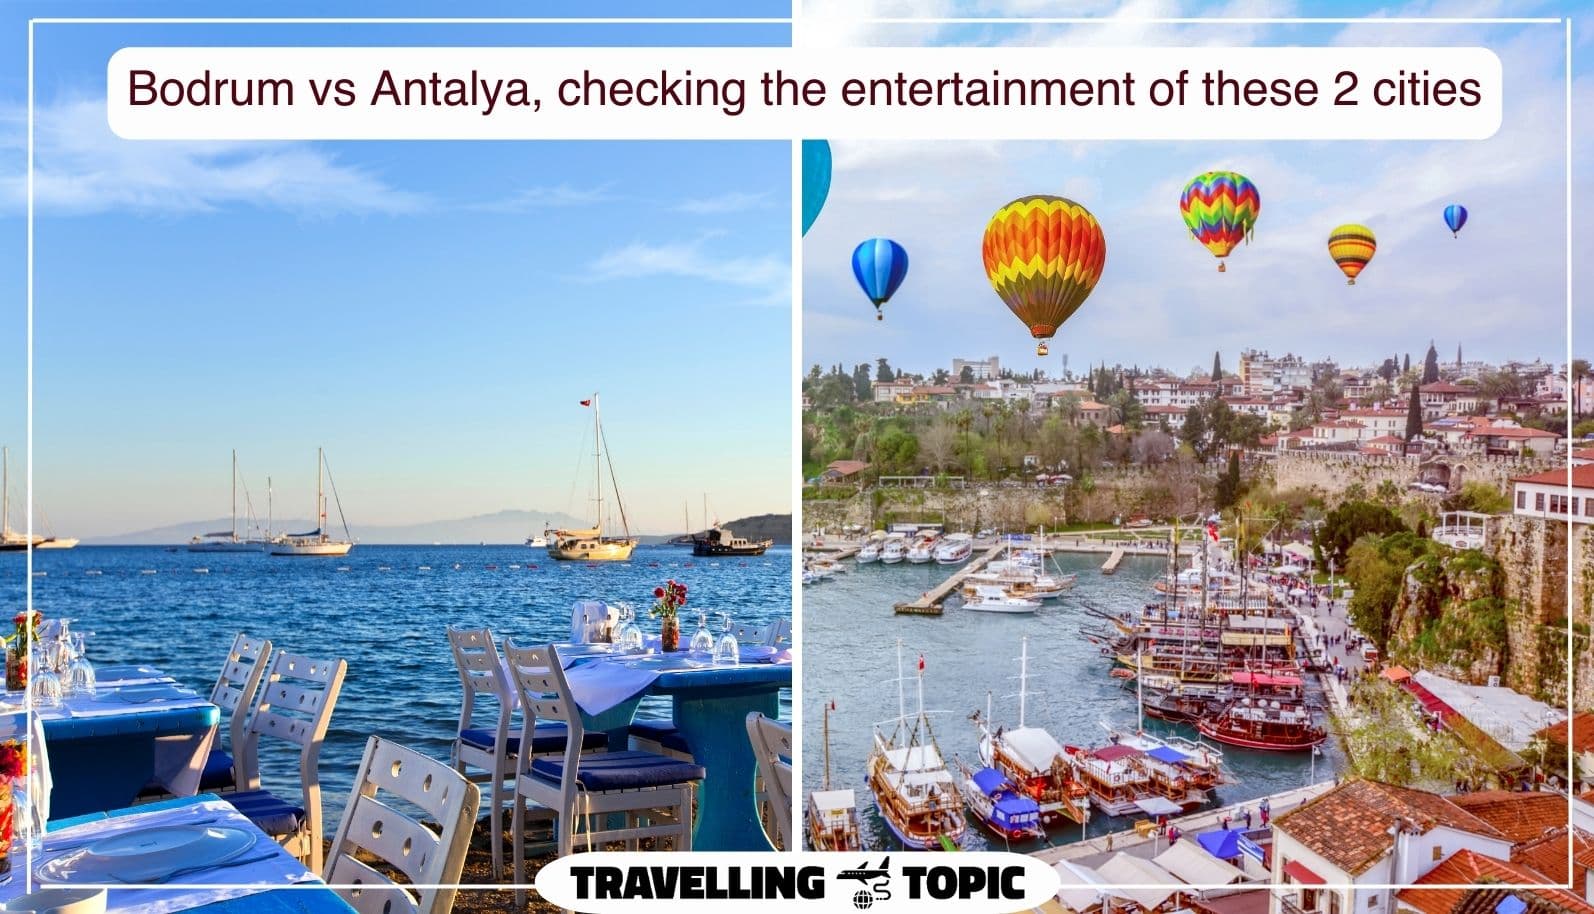 Bodrum vs Antalya, checking the entertainment of these 2 cities